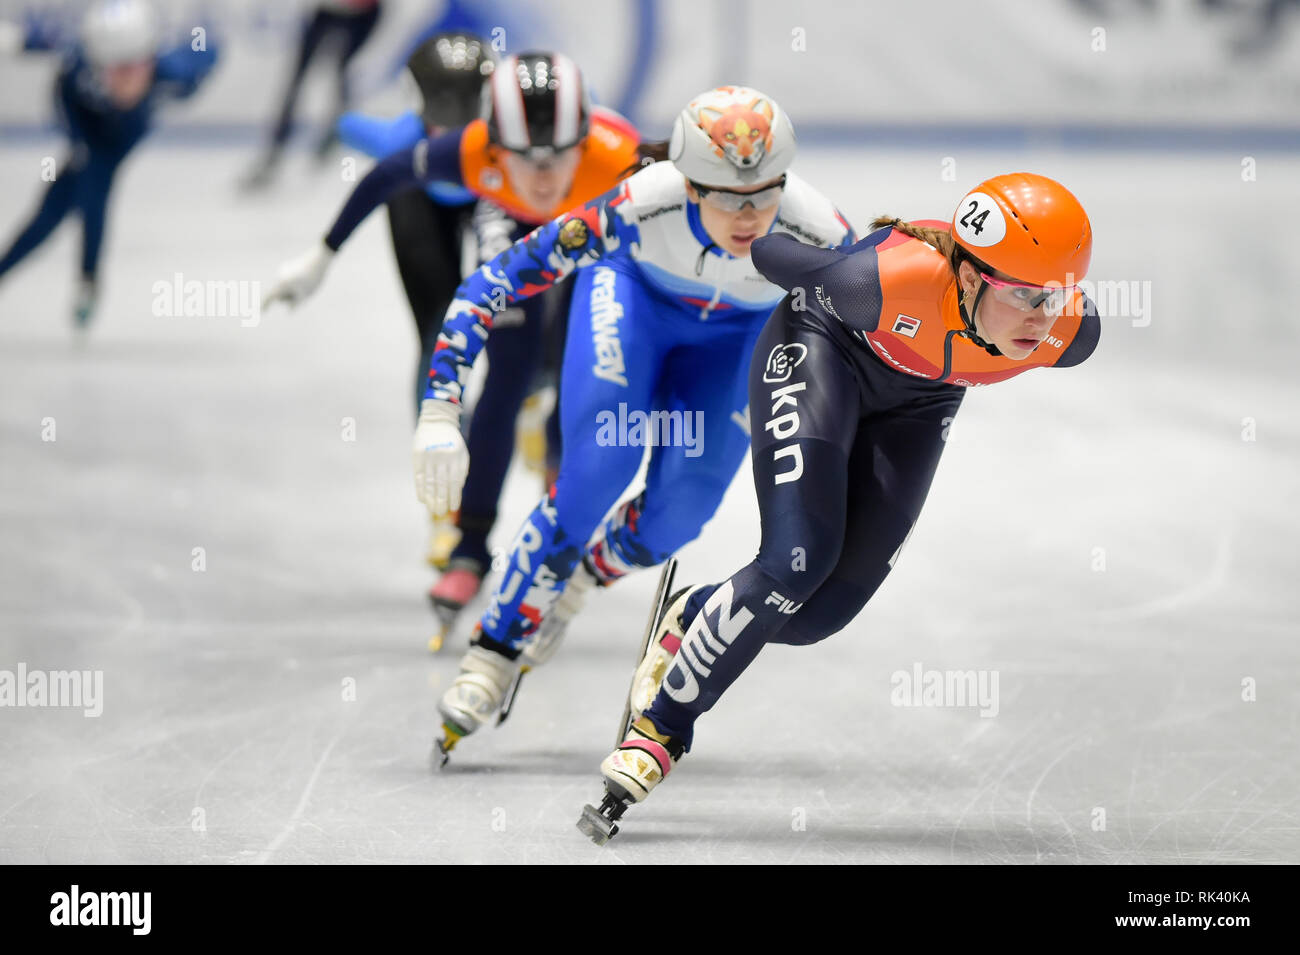 Torino, Italy. 9th February, 2019. ISU World Cup Short Track Speed Skating held at the Tazzoli Ice Rink Torino. In the picture SCHULTING Suzanne NED Senior W Competitor. Damiano Benedetto/ Alamy Live News Stock Photo